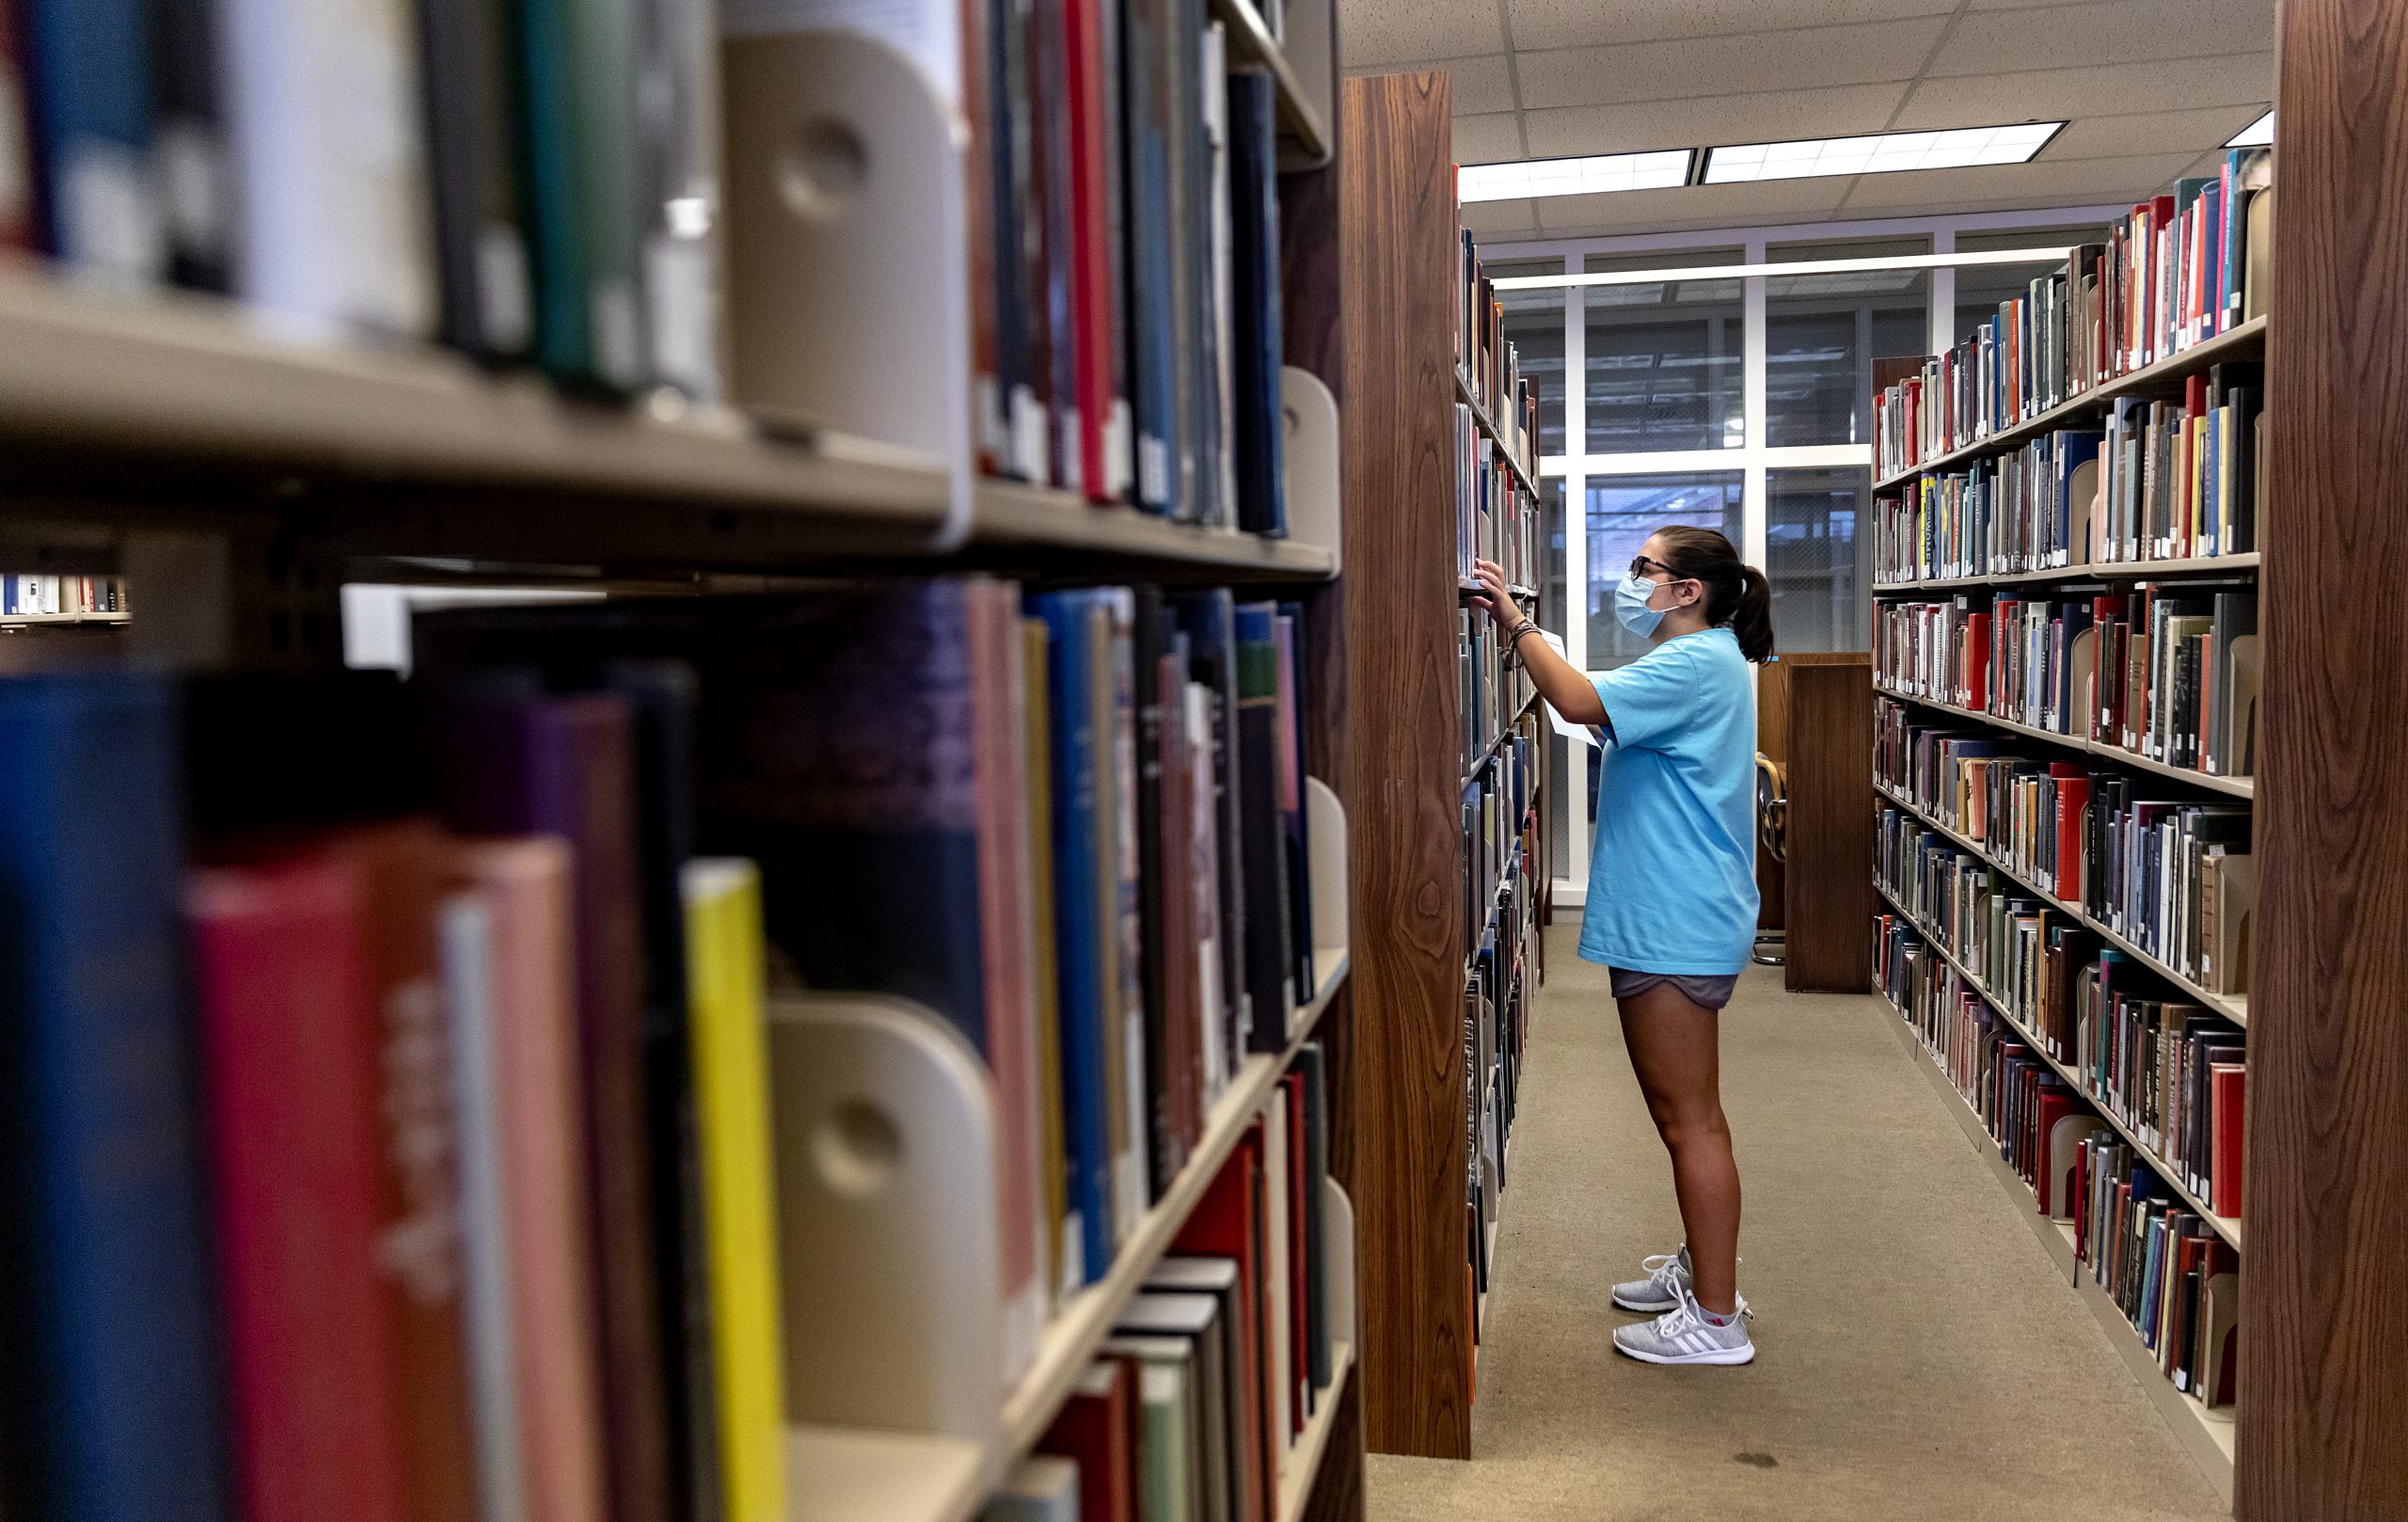 Maddie Stahle shelving books in the Art Library stacks